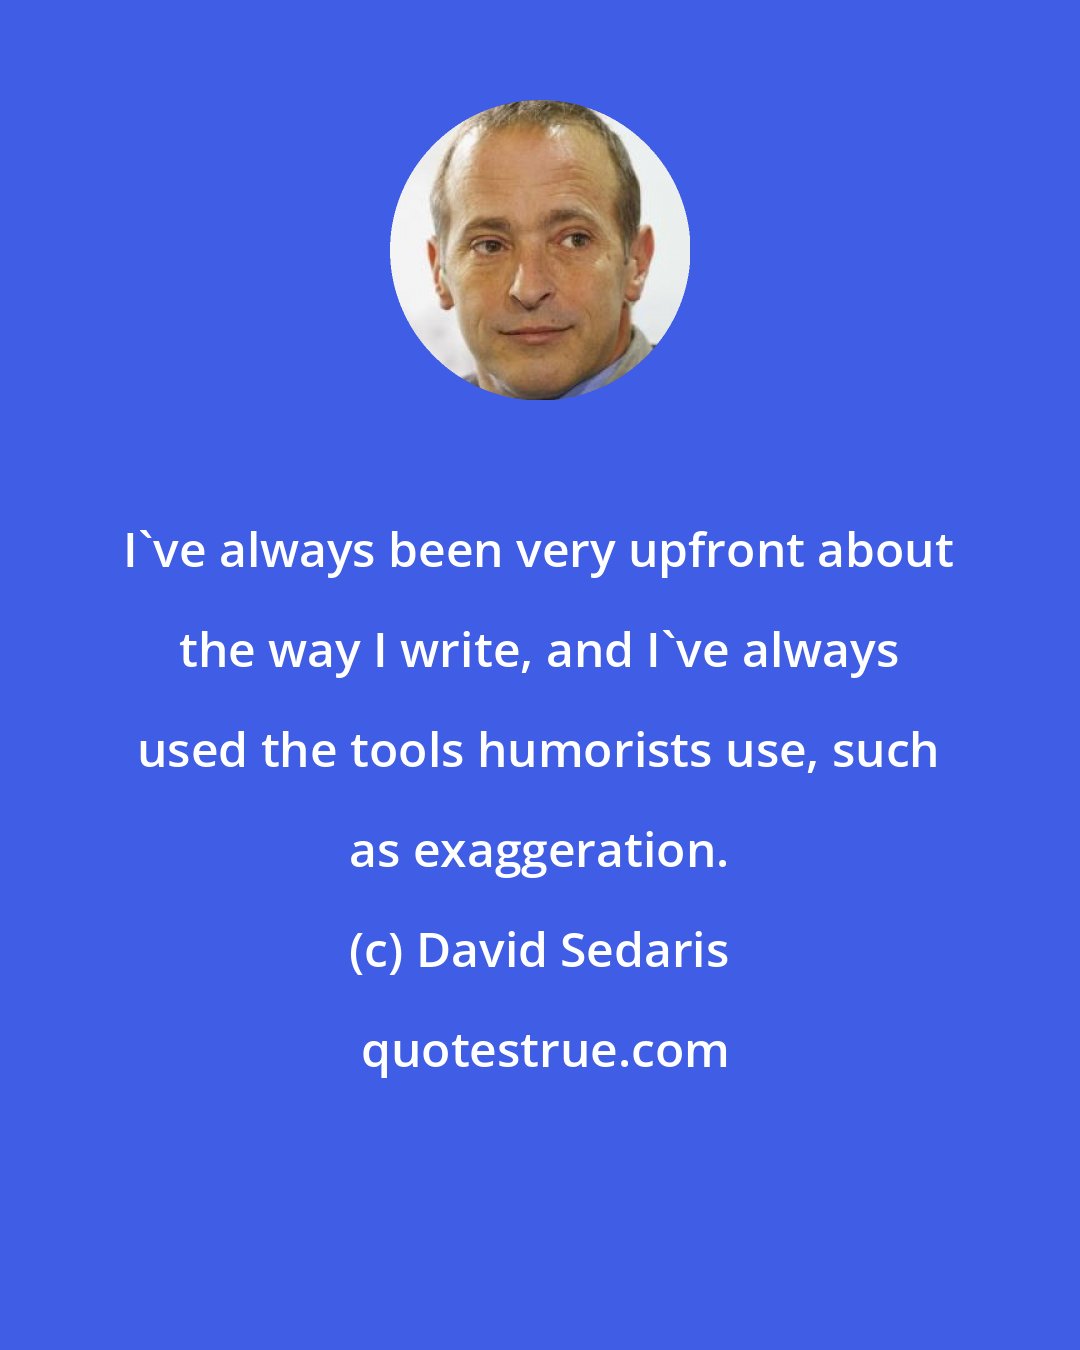 David Sedaris: I've always been very upfront about the way I write, and I've always used the tools humorists use, such as exaggeration.